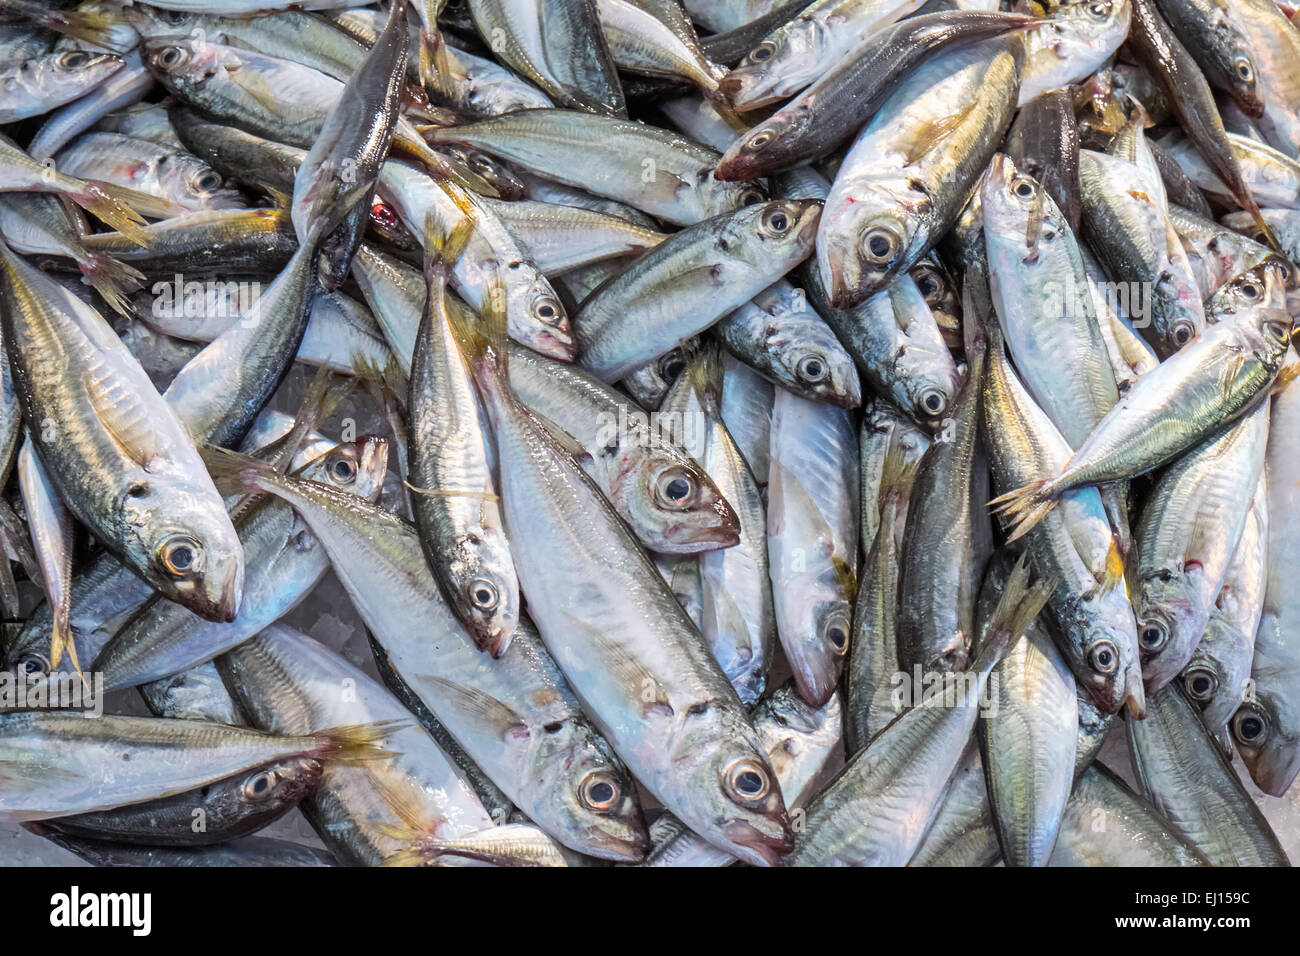 Small fishes for sale at a market Stock Photo